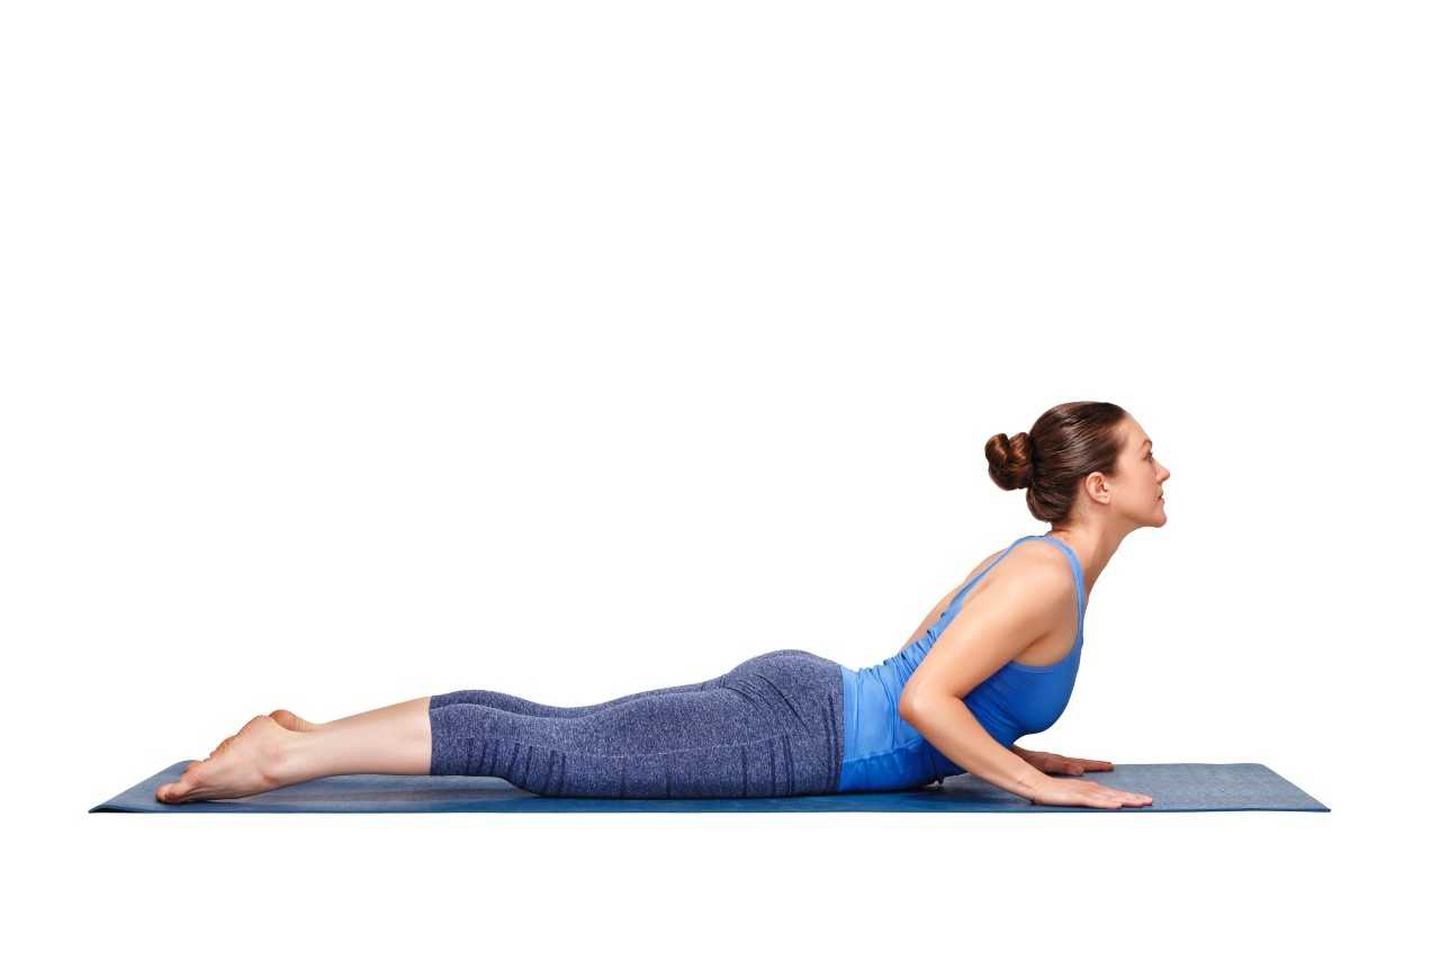 Yoga for Back Pain: 10 Poses to Try, Why It Works, and More